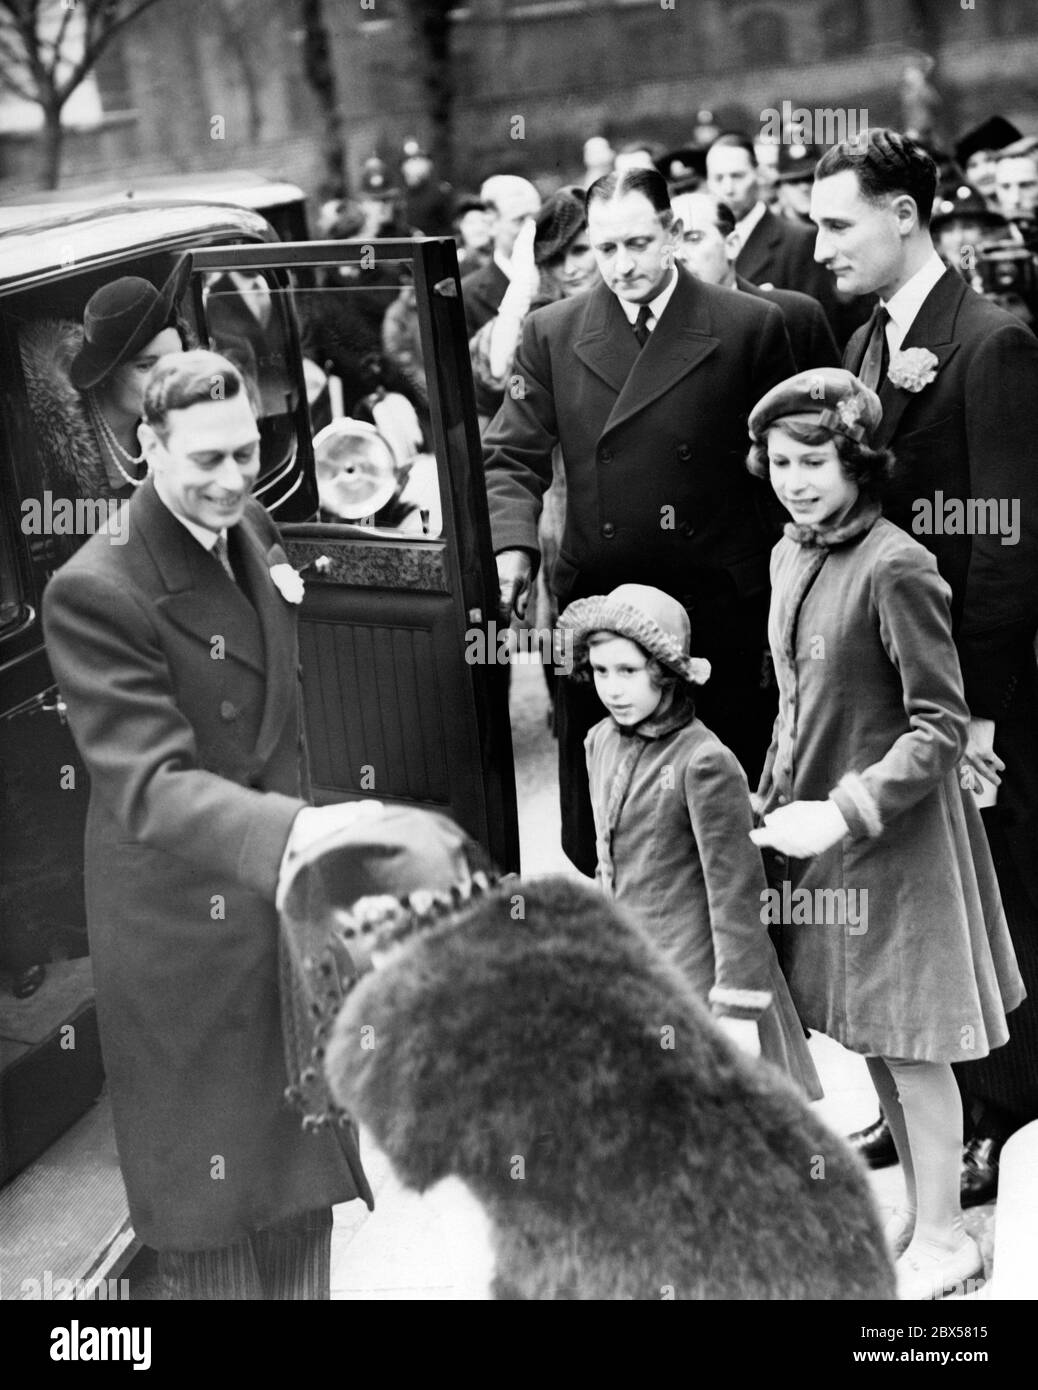 Elizabeth II (right) with her sister Princess Margaret Rose, King George VI (front) and Queen Elizabeth ( hidden) on their way to the wedding of Cecilia Bowes-Lyon, the eldest daughter of Lord Glamis Timothy Bowes-Lyon and Mr. Kenneth Harington at the Holy Trinity Church. Stock Photo